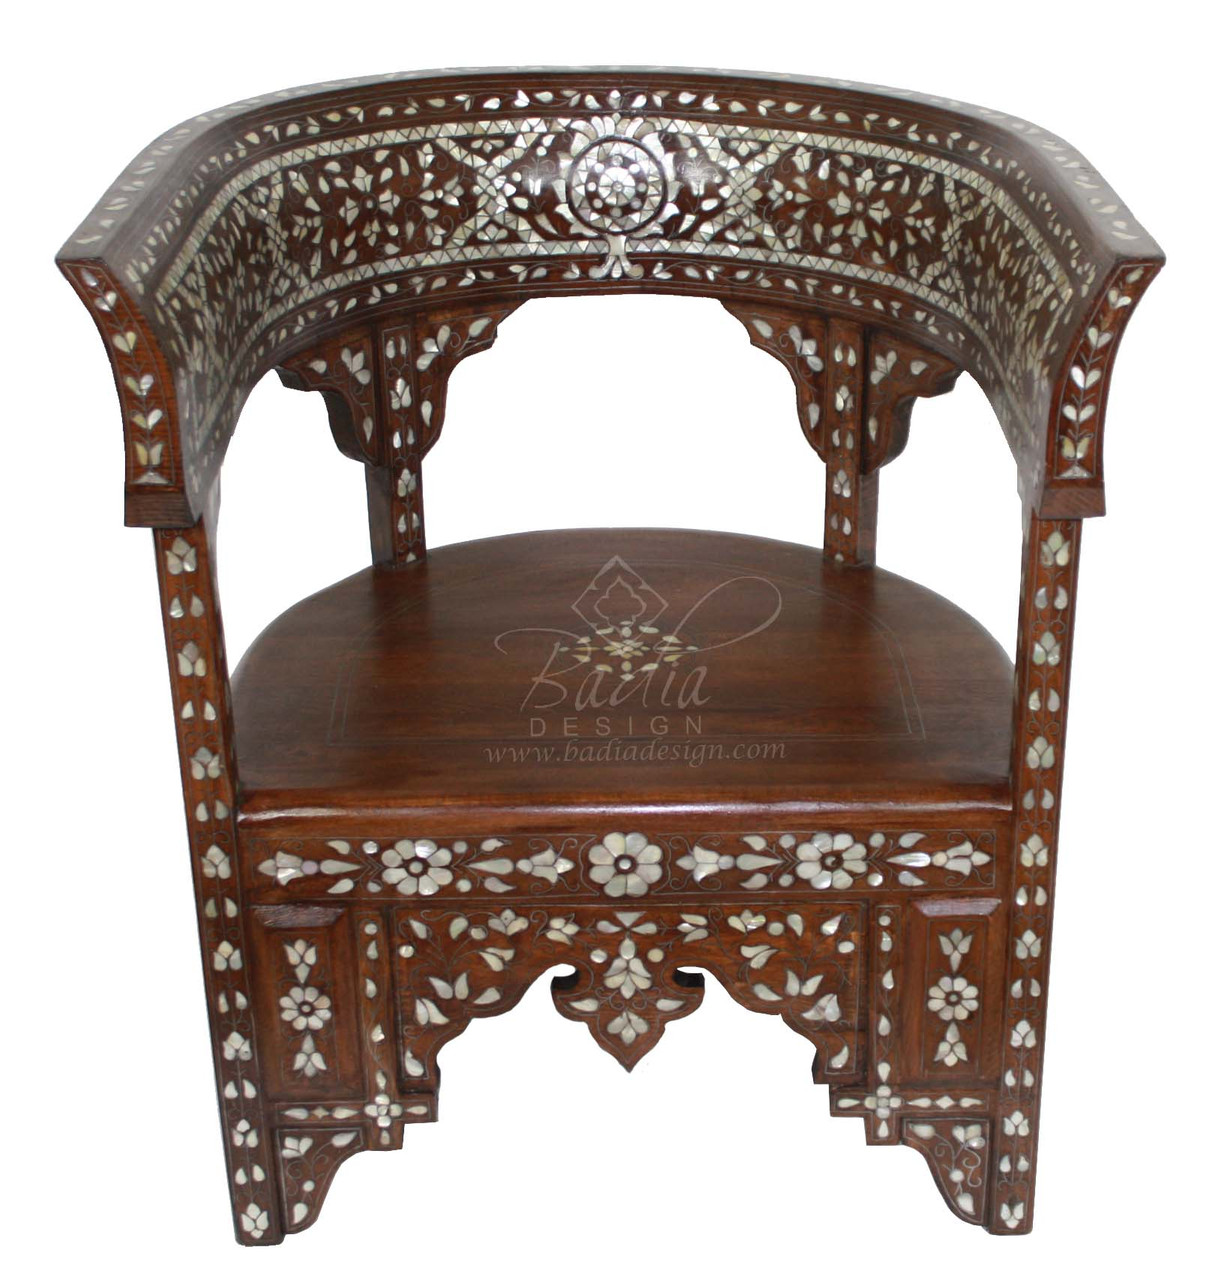 Moroccan Mother Of Pearl Inlaid Chair From Badia Design Inc